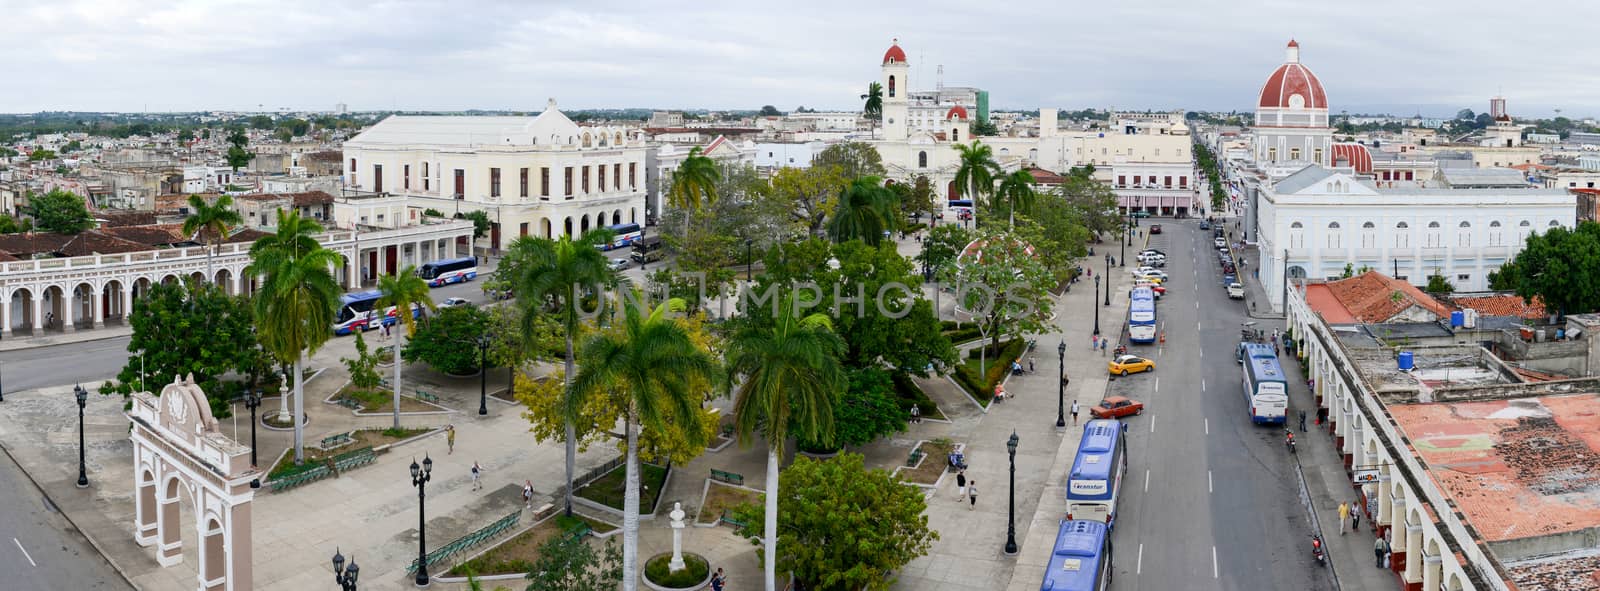 Jose Marti park with Town Hall and Cathedral of Cienfuegos  by Fotoember